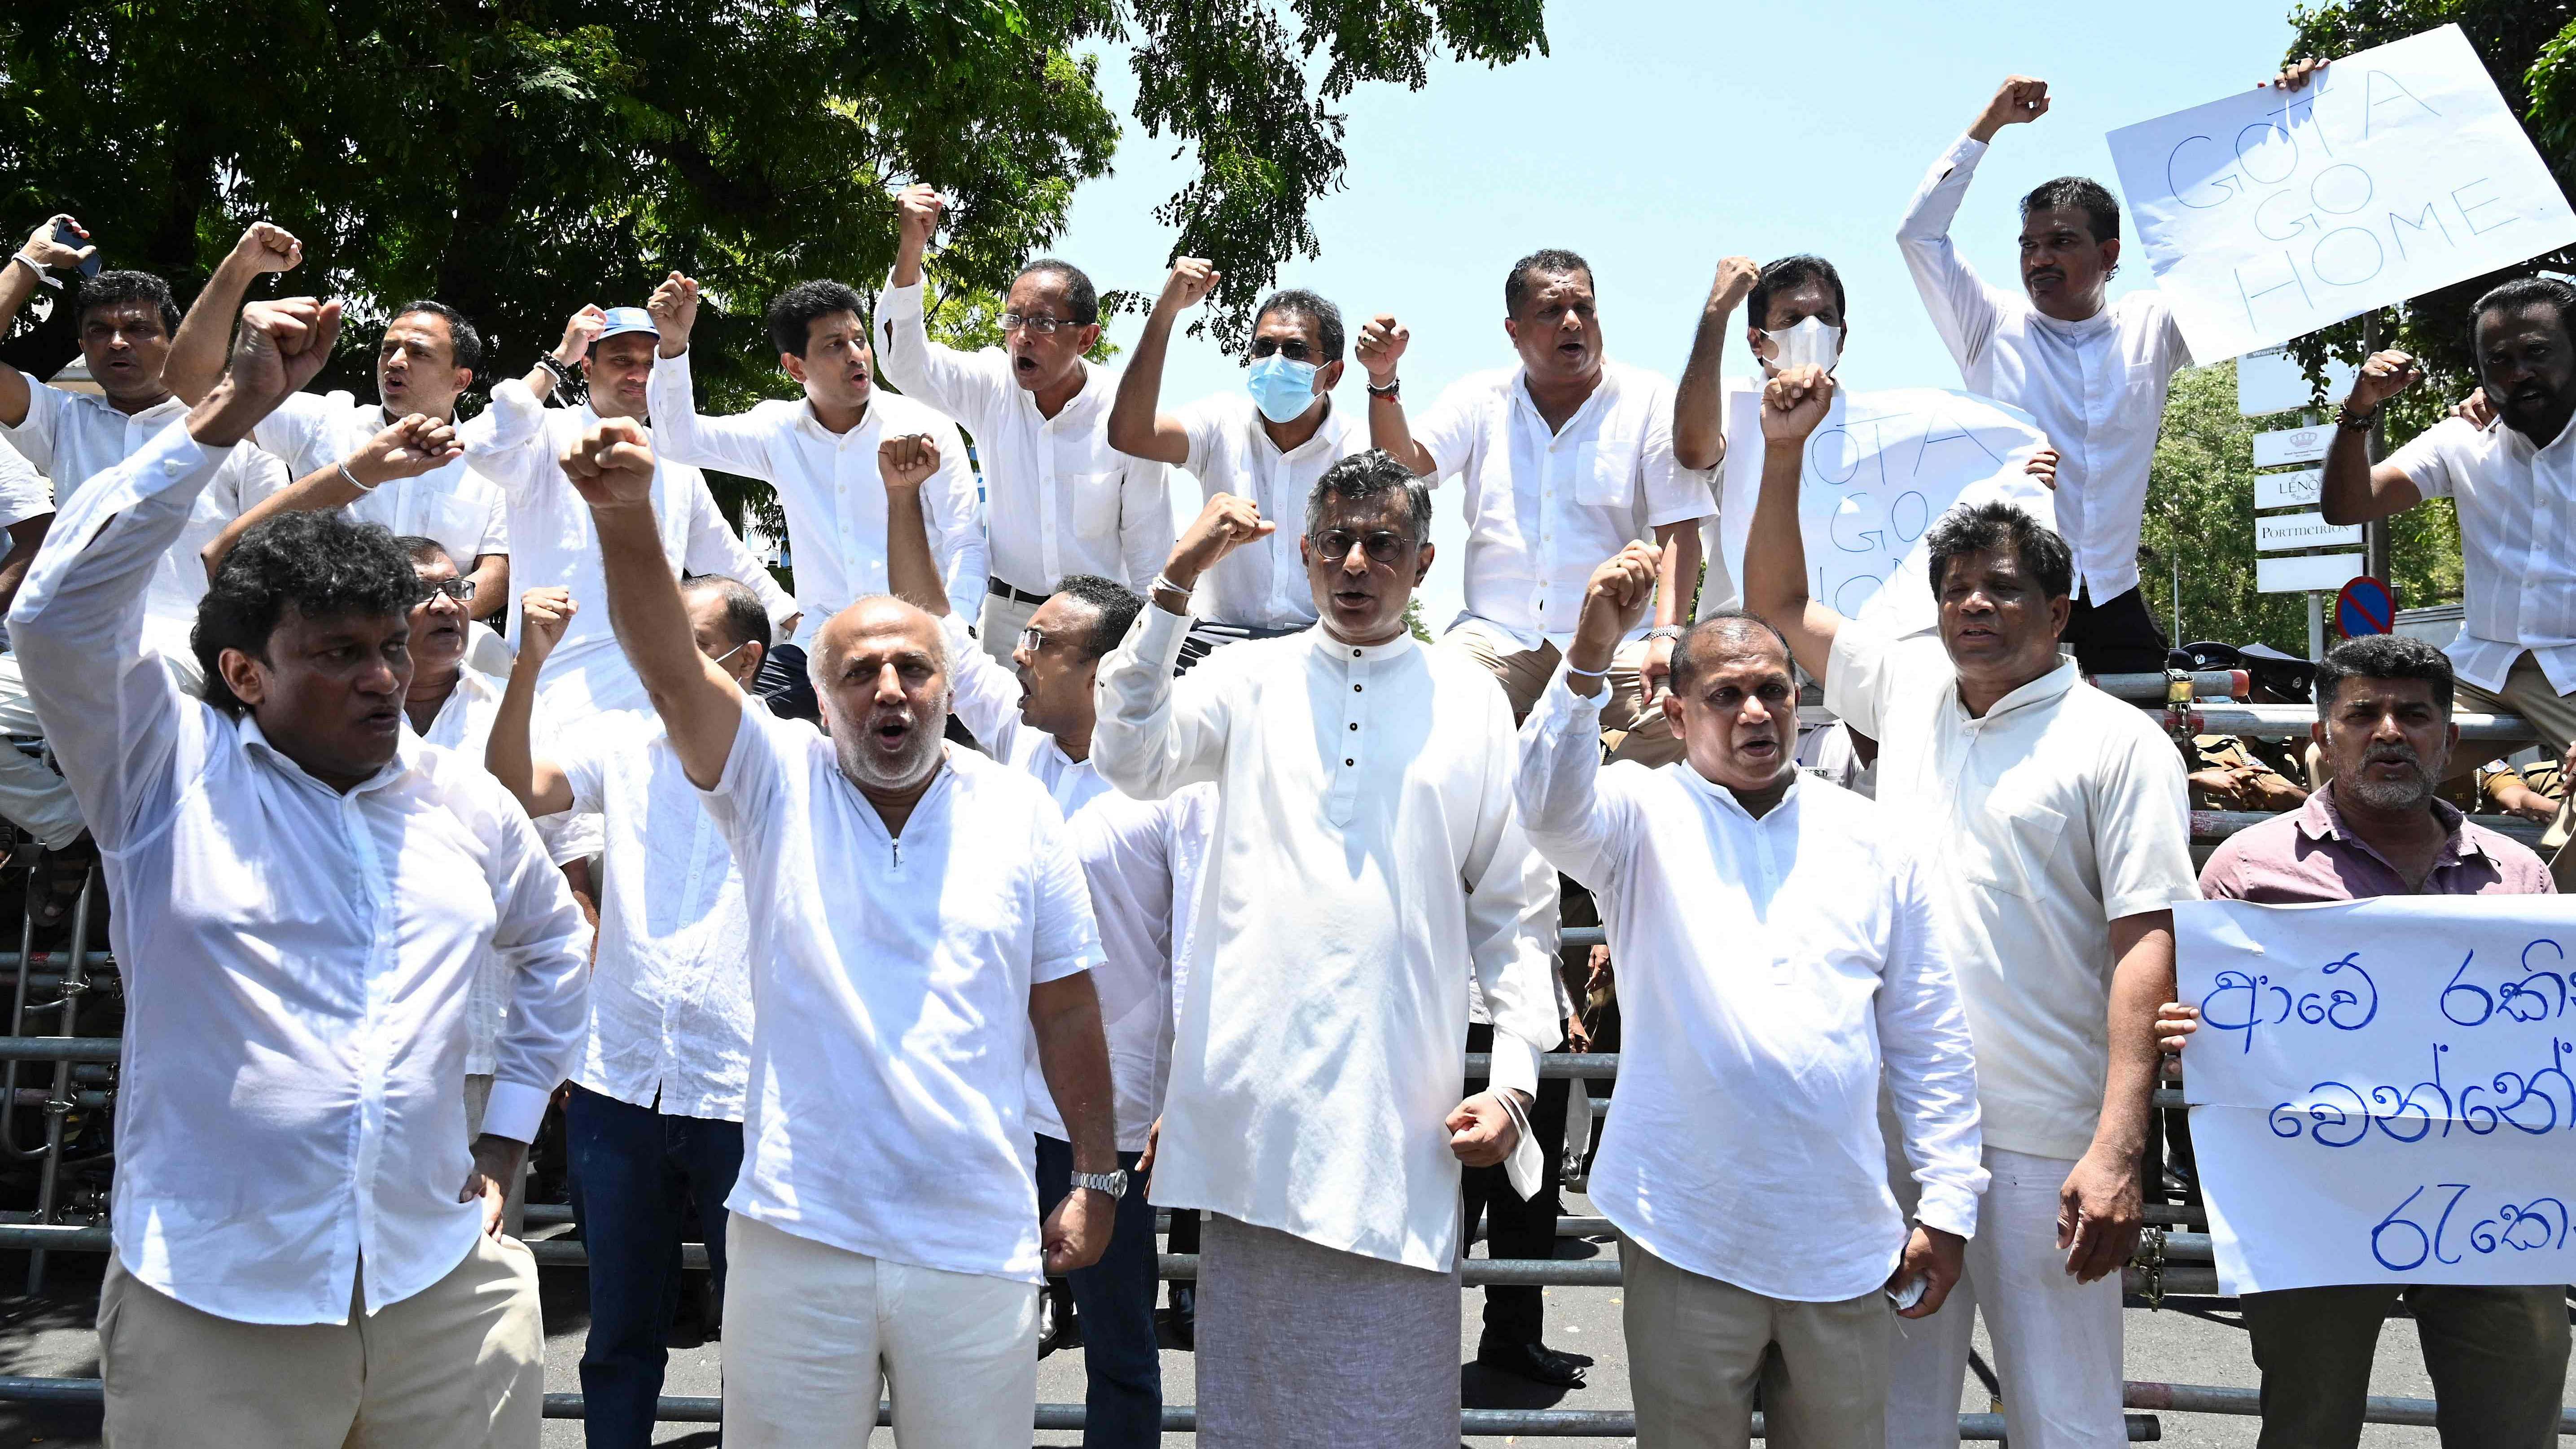 Sri Lanka's main opposition parliament members shout slogans as they protest in Colombo. Credit: AFP Photo